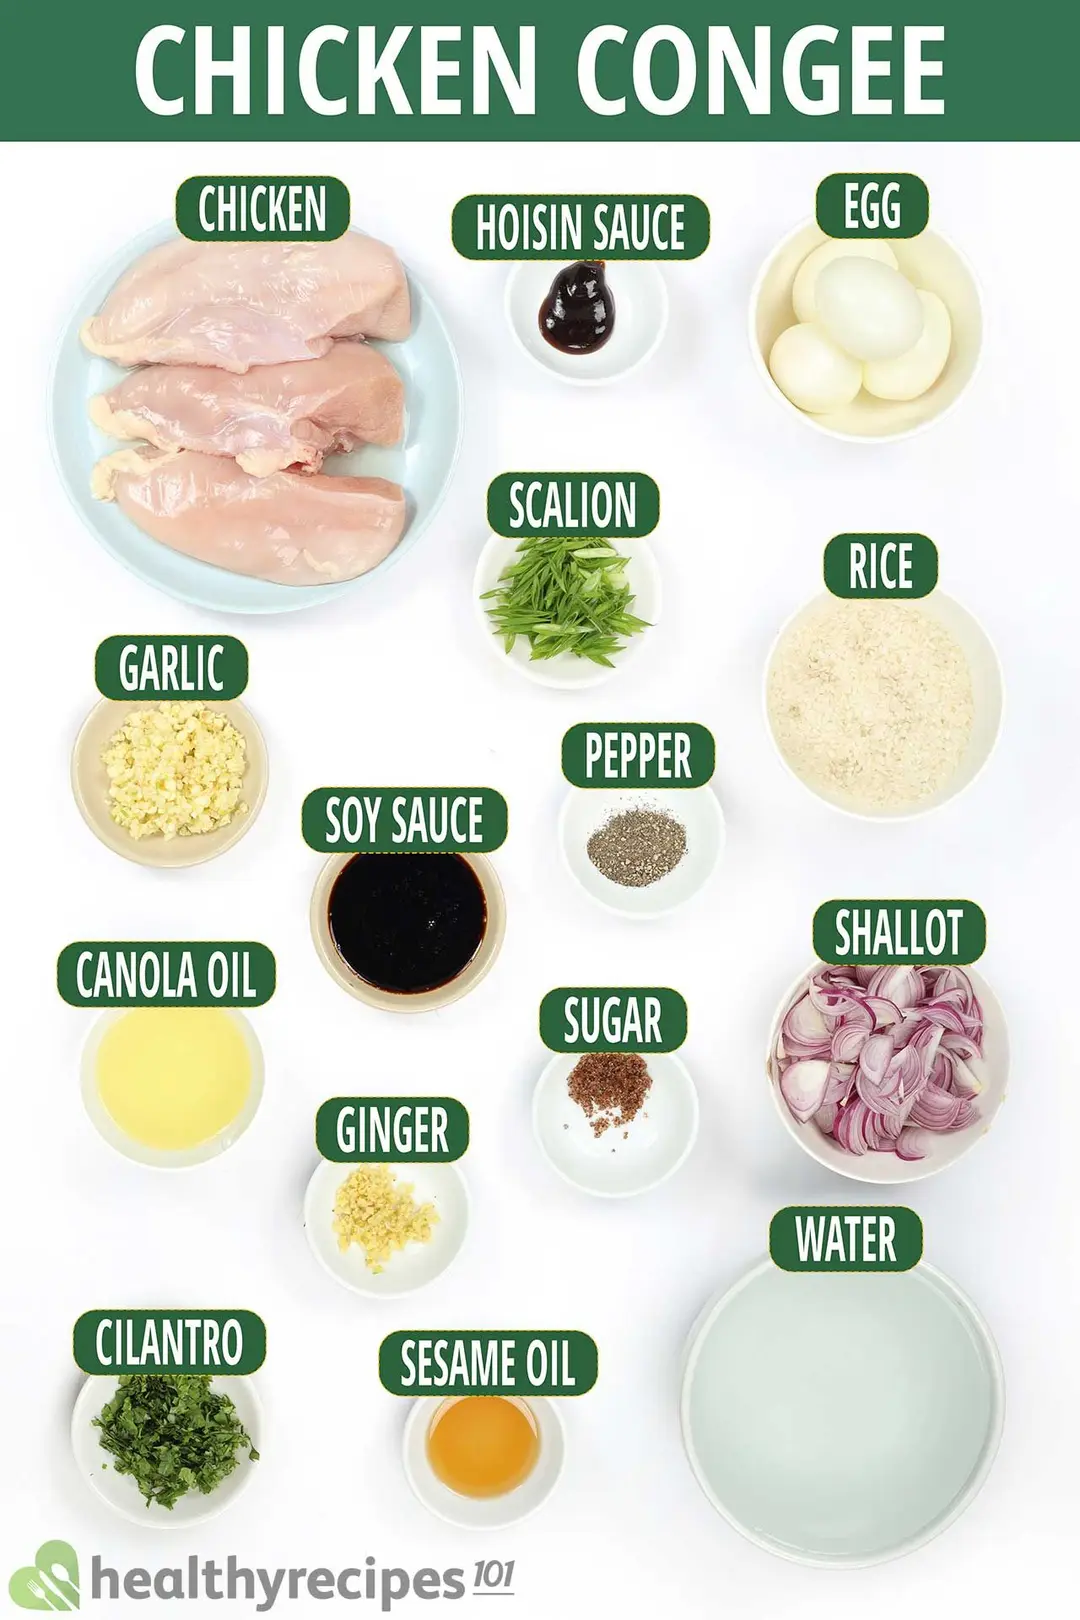 Ingredients for chicken congee: chicken breasts, rice, water, eggs, shallots, herbs, and seasonings